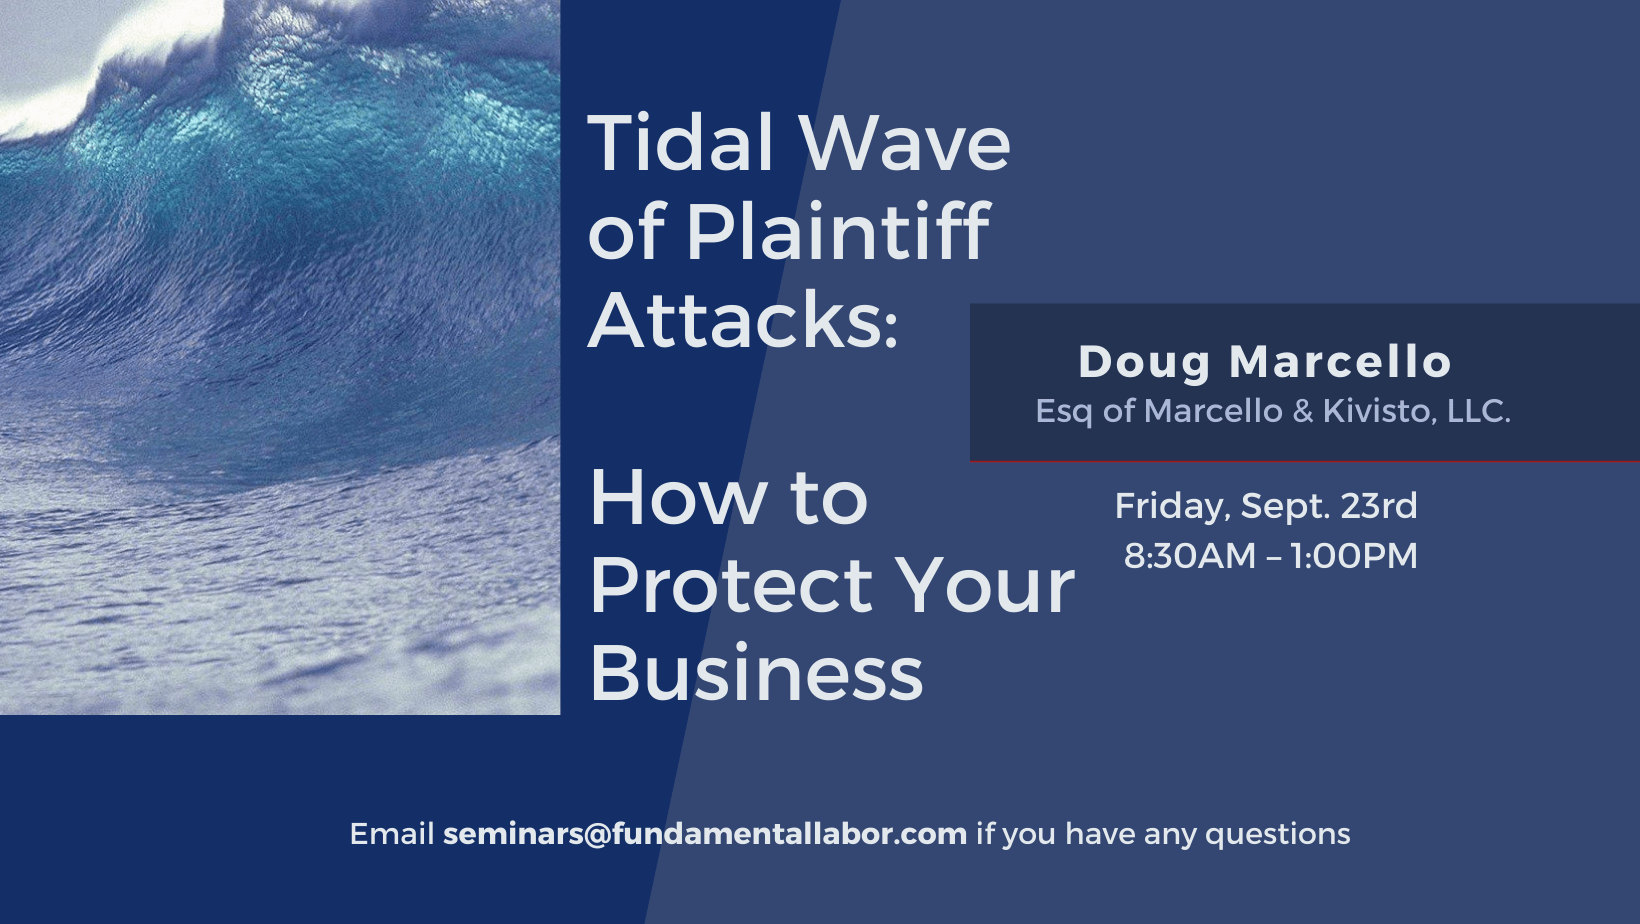 Fundamental Seminar Announcements: Tidal Wave of Plaintiff Attacks: How to Protect Your Business